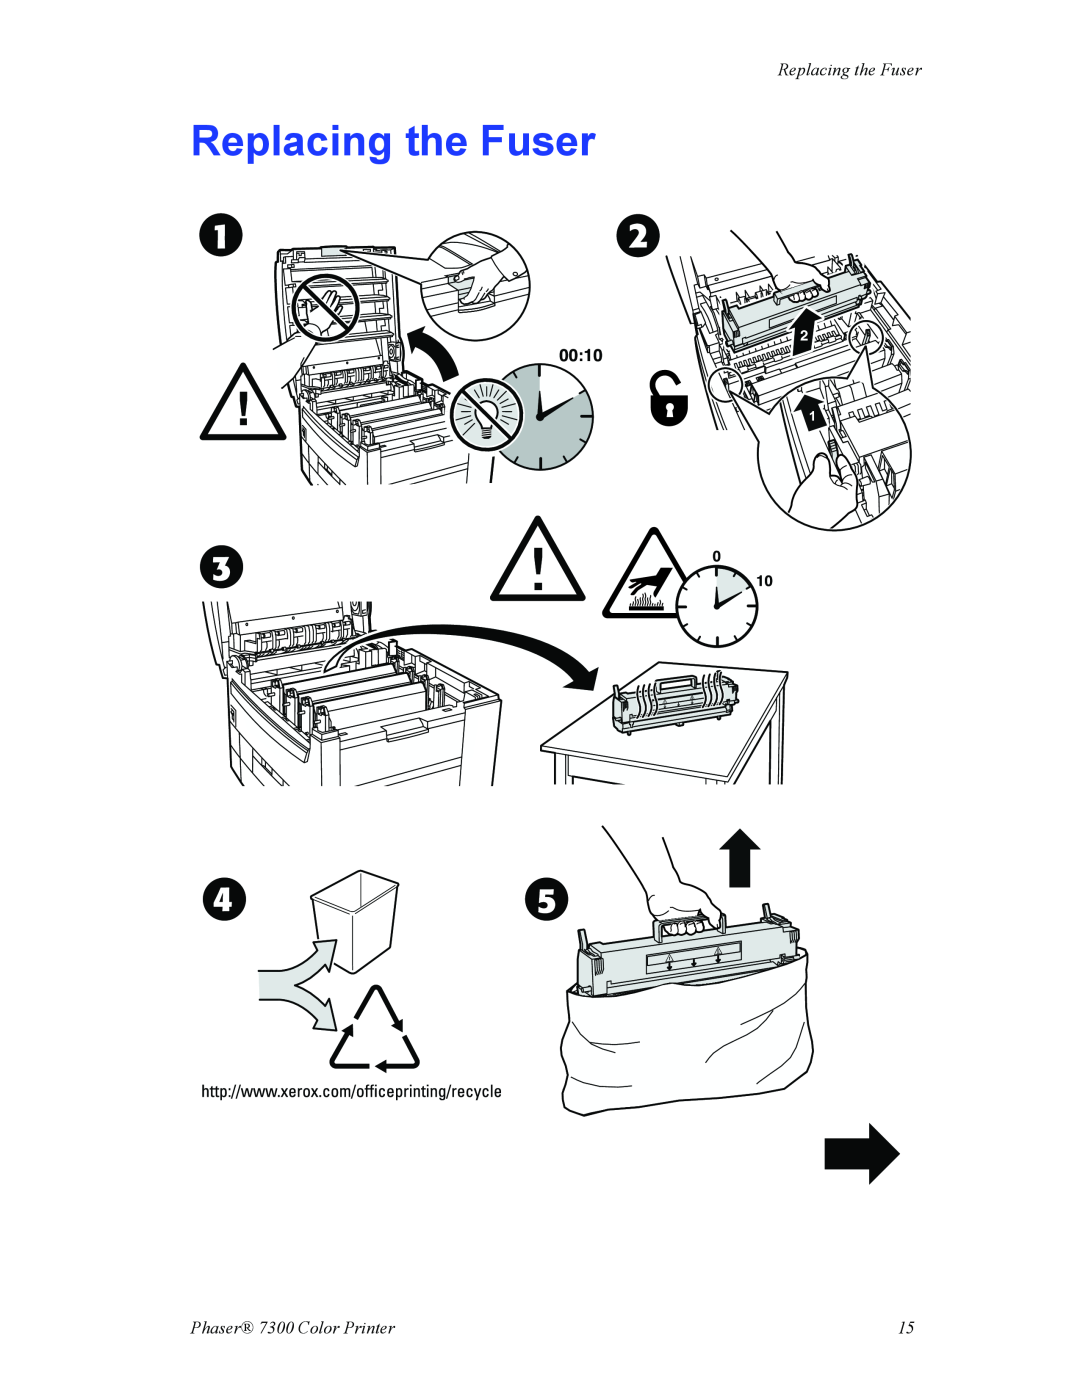 Xerox manual Replacing the Fuser, 0010, Phaser 7300 Color Printer 